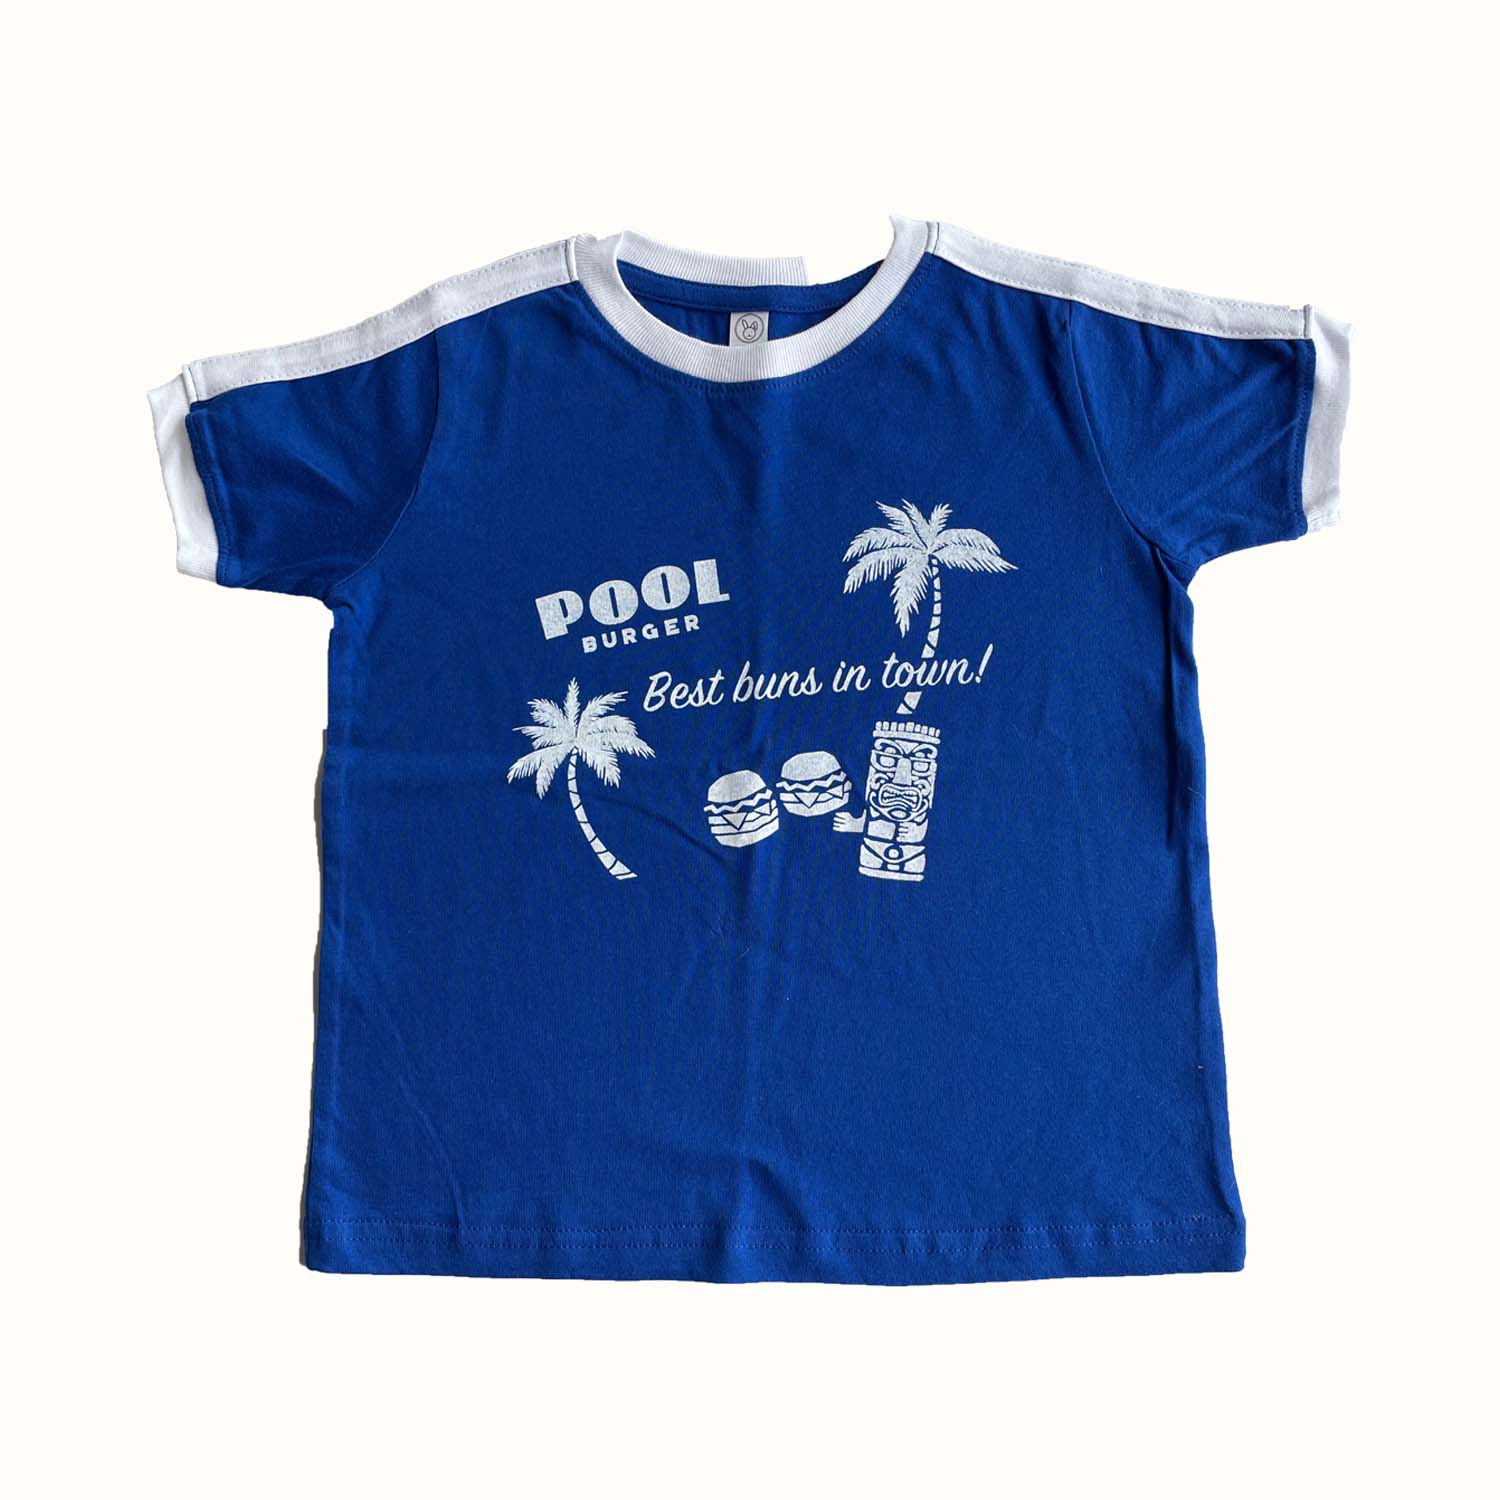 "Best Buns in Town" Pool Burger Toddler Tee